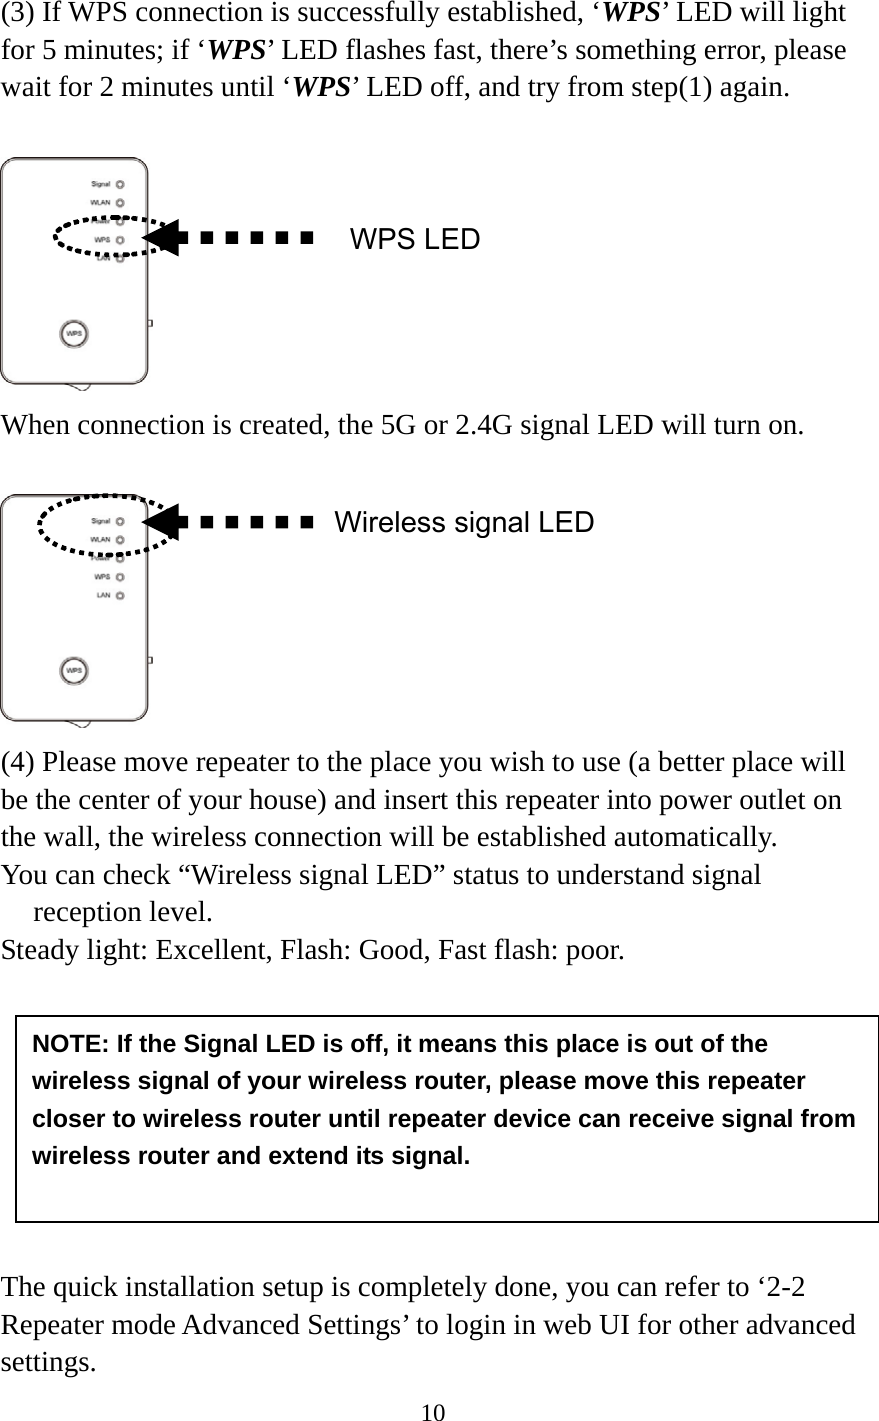 10   (3) If WPS connection is successfully established, ‘WPS’ LED will light for 5 minutes; if ‘WPS’ LED flashes fast, there’s something error, please wait for 2 minutes until ‘WPS’ LED off, and try from step(1) again.    When connection is created, the 5G or 2.4G signal LED will turn on.   (4) Please move repeater to the place you wish to use (a better place will be the center of your house) and insert this repeater into power outlet on the wall, the wireless connection will be established automatically.   You can check “Wireless signal LED” status to understand signal reception level.   Steady light: Excellent, Flash: Good, Fast flash: poor.         The quick installation setup is completely done, you can refer to ‘2-2 Repeater mode Advanced Settings’ to login in web UI for other advanced settings. WPS LEDWireless signal LEDNOTE: If the Signal LED is off, it means this place is out of the wireless signal of your wireless router, please move this repeater closer to wireless router until repeater device can receive signal from wireless router and extend its signal. 